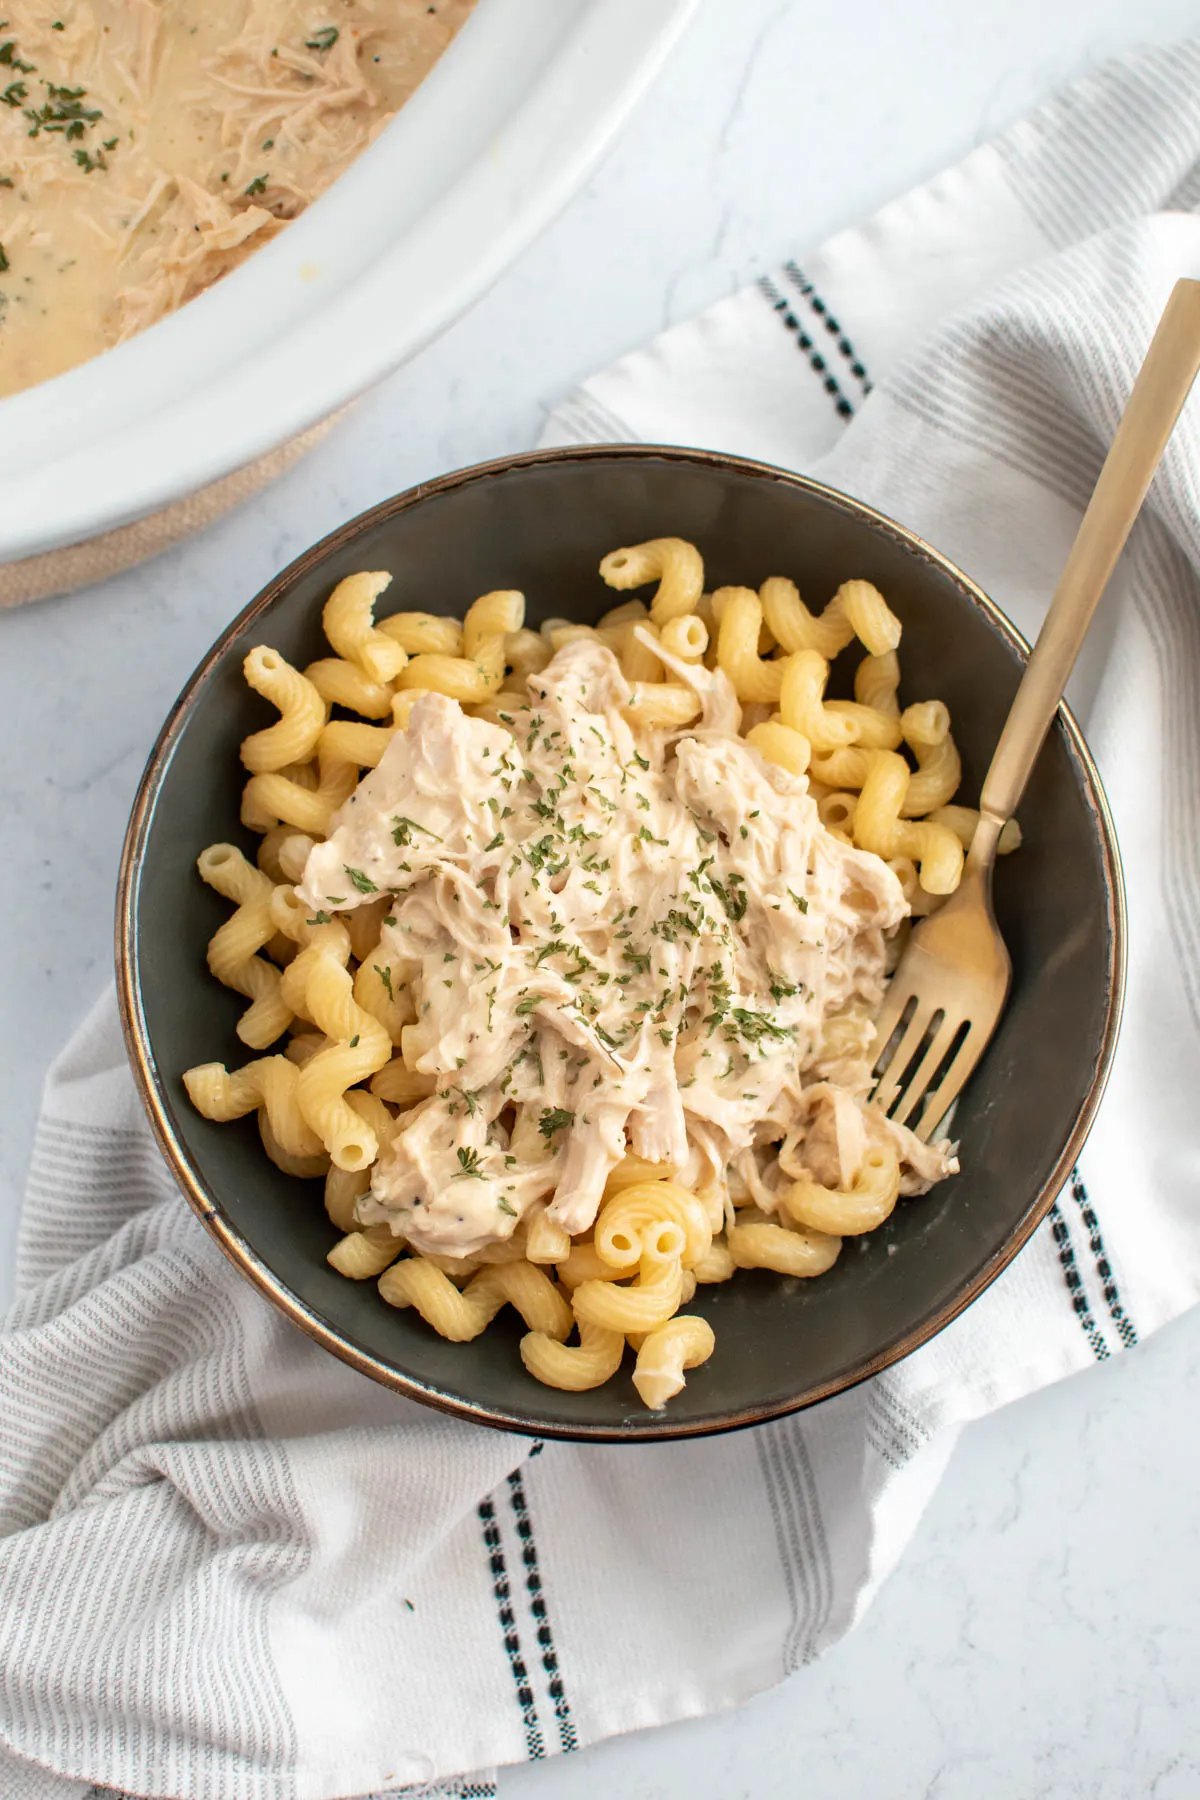 Bowl of pasta with creamy Italian chicken and fork on striped kitchen towel.